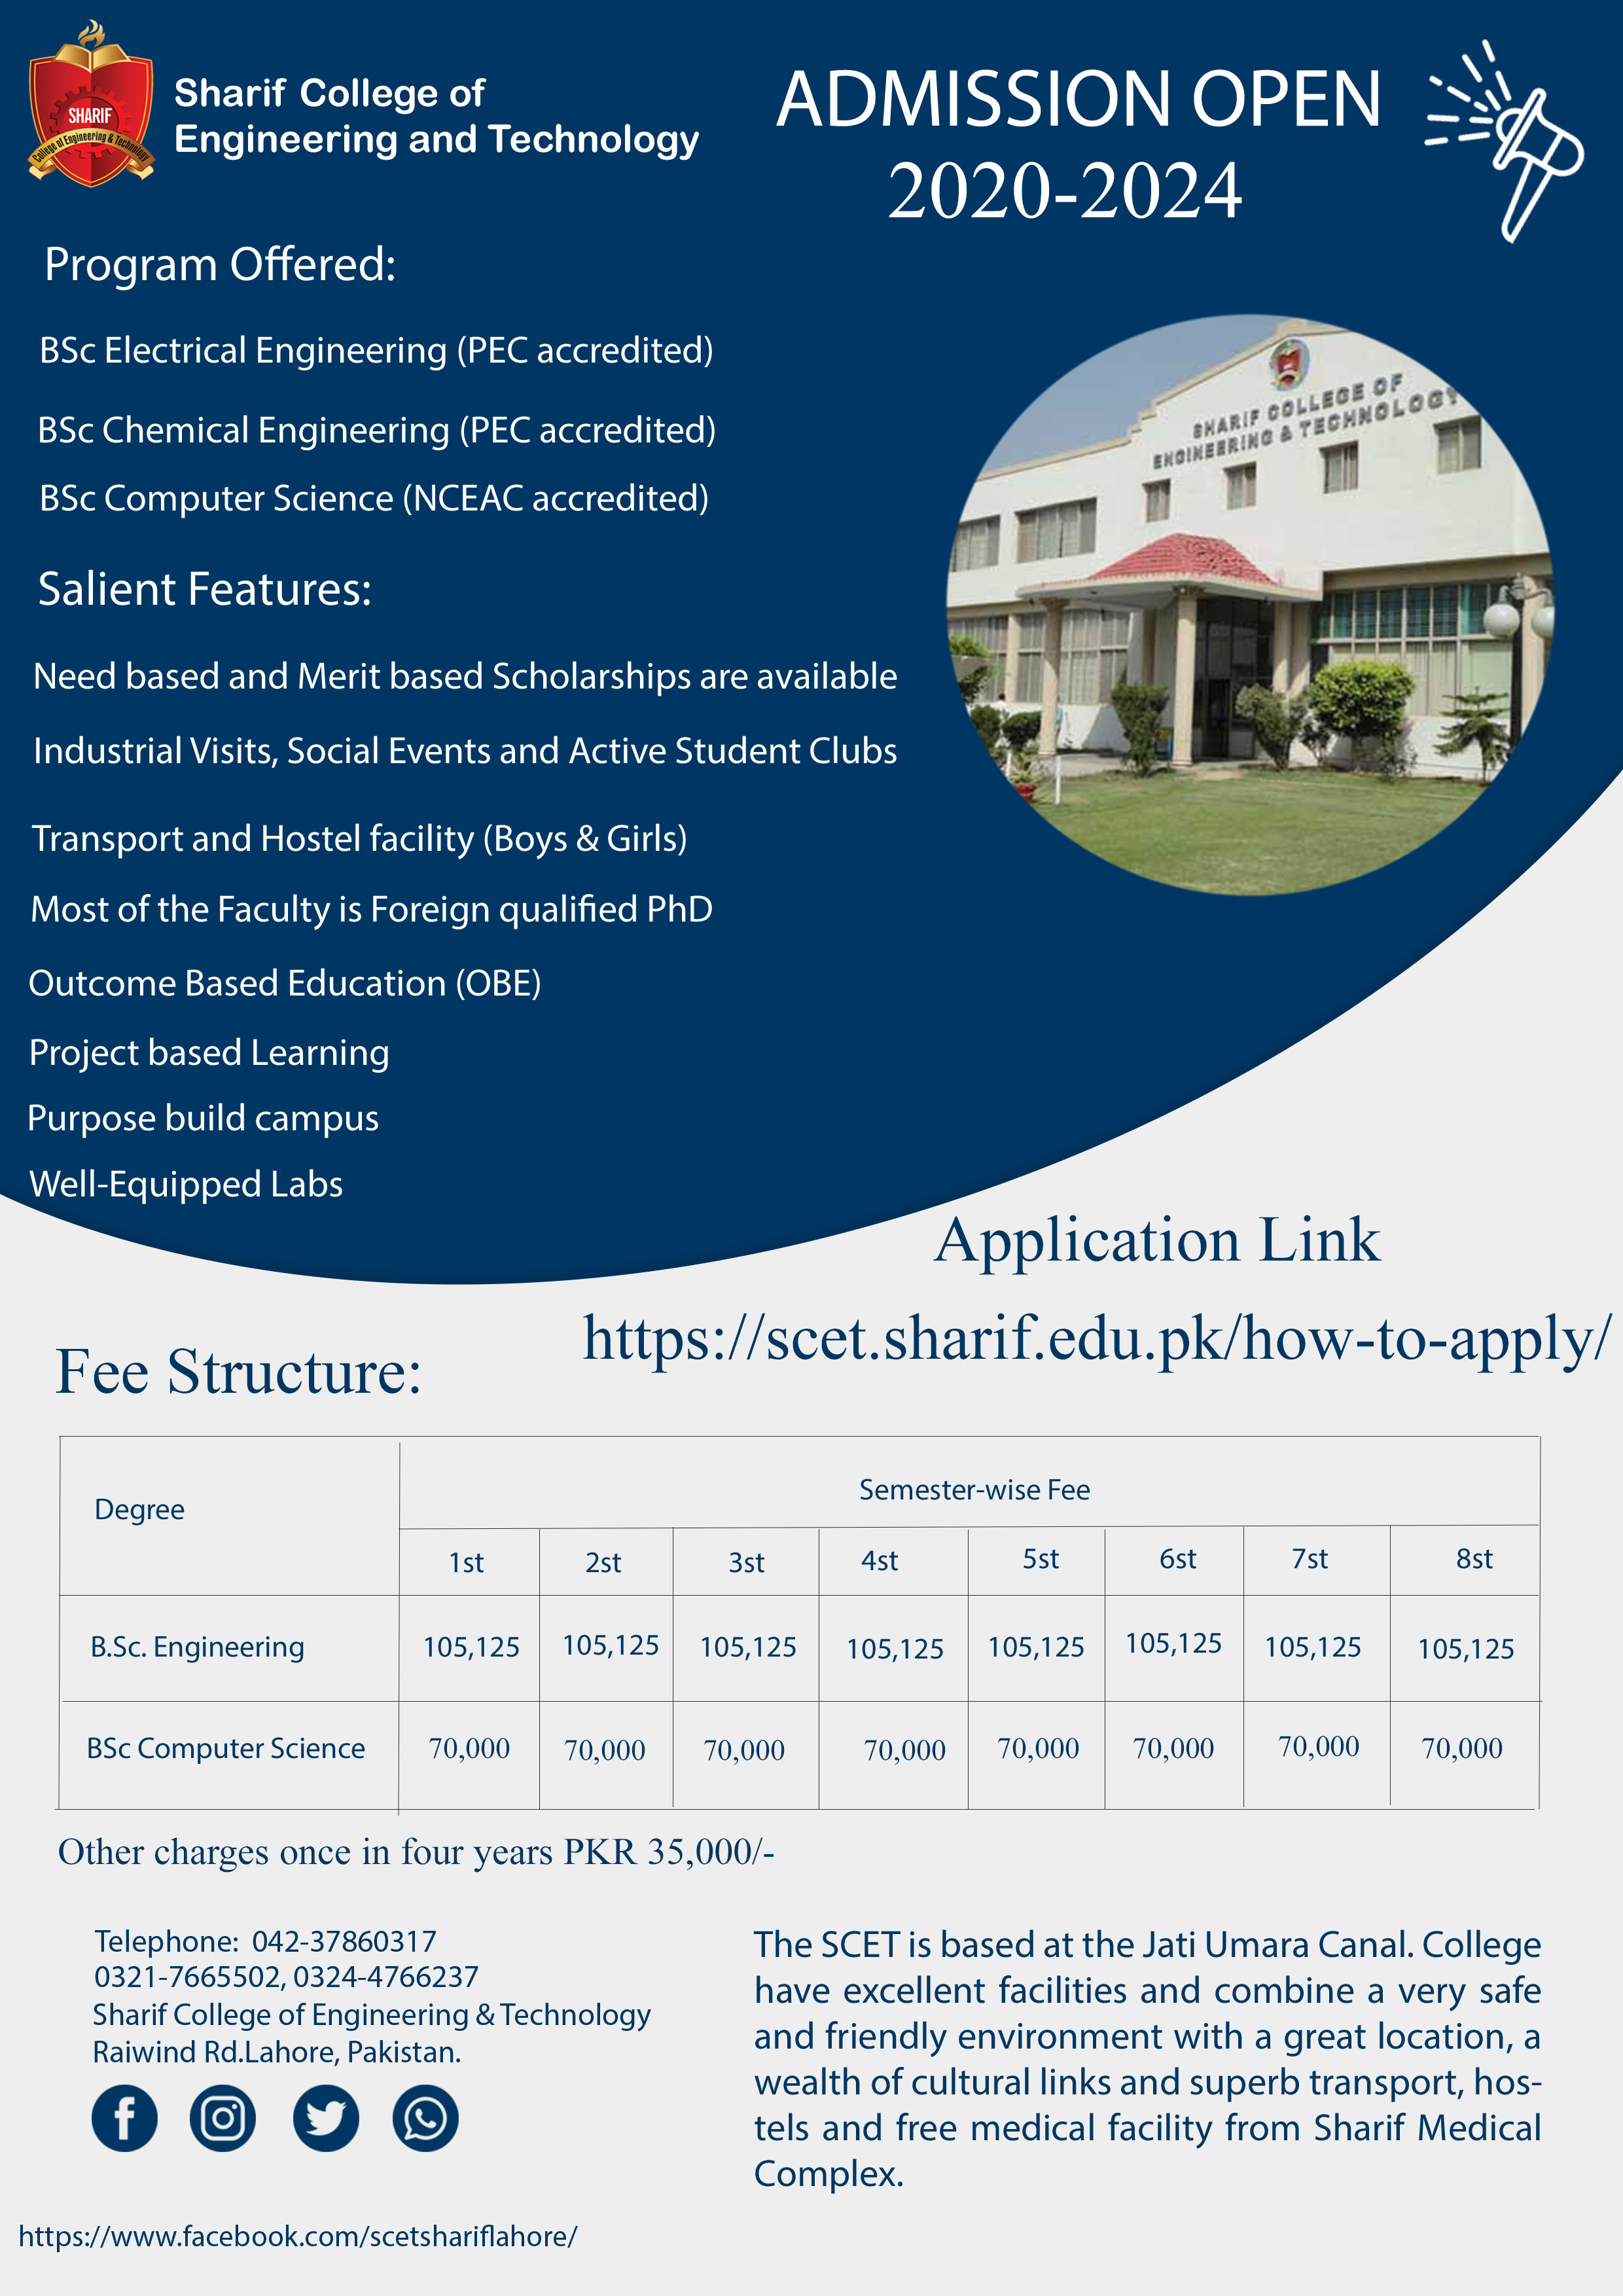 Admission Open 2020-2024